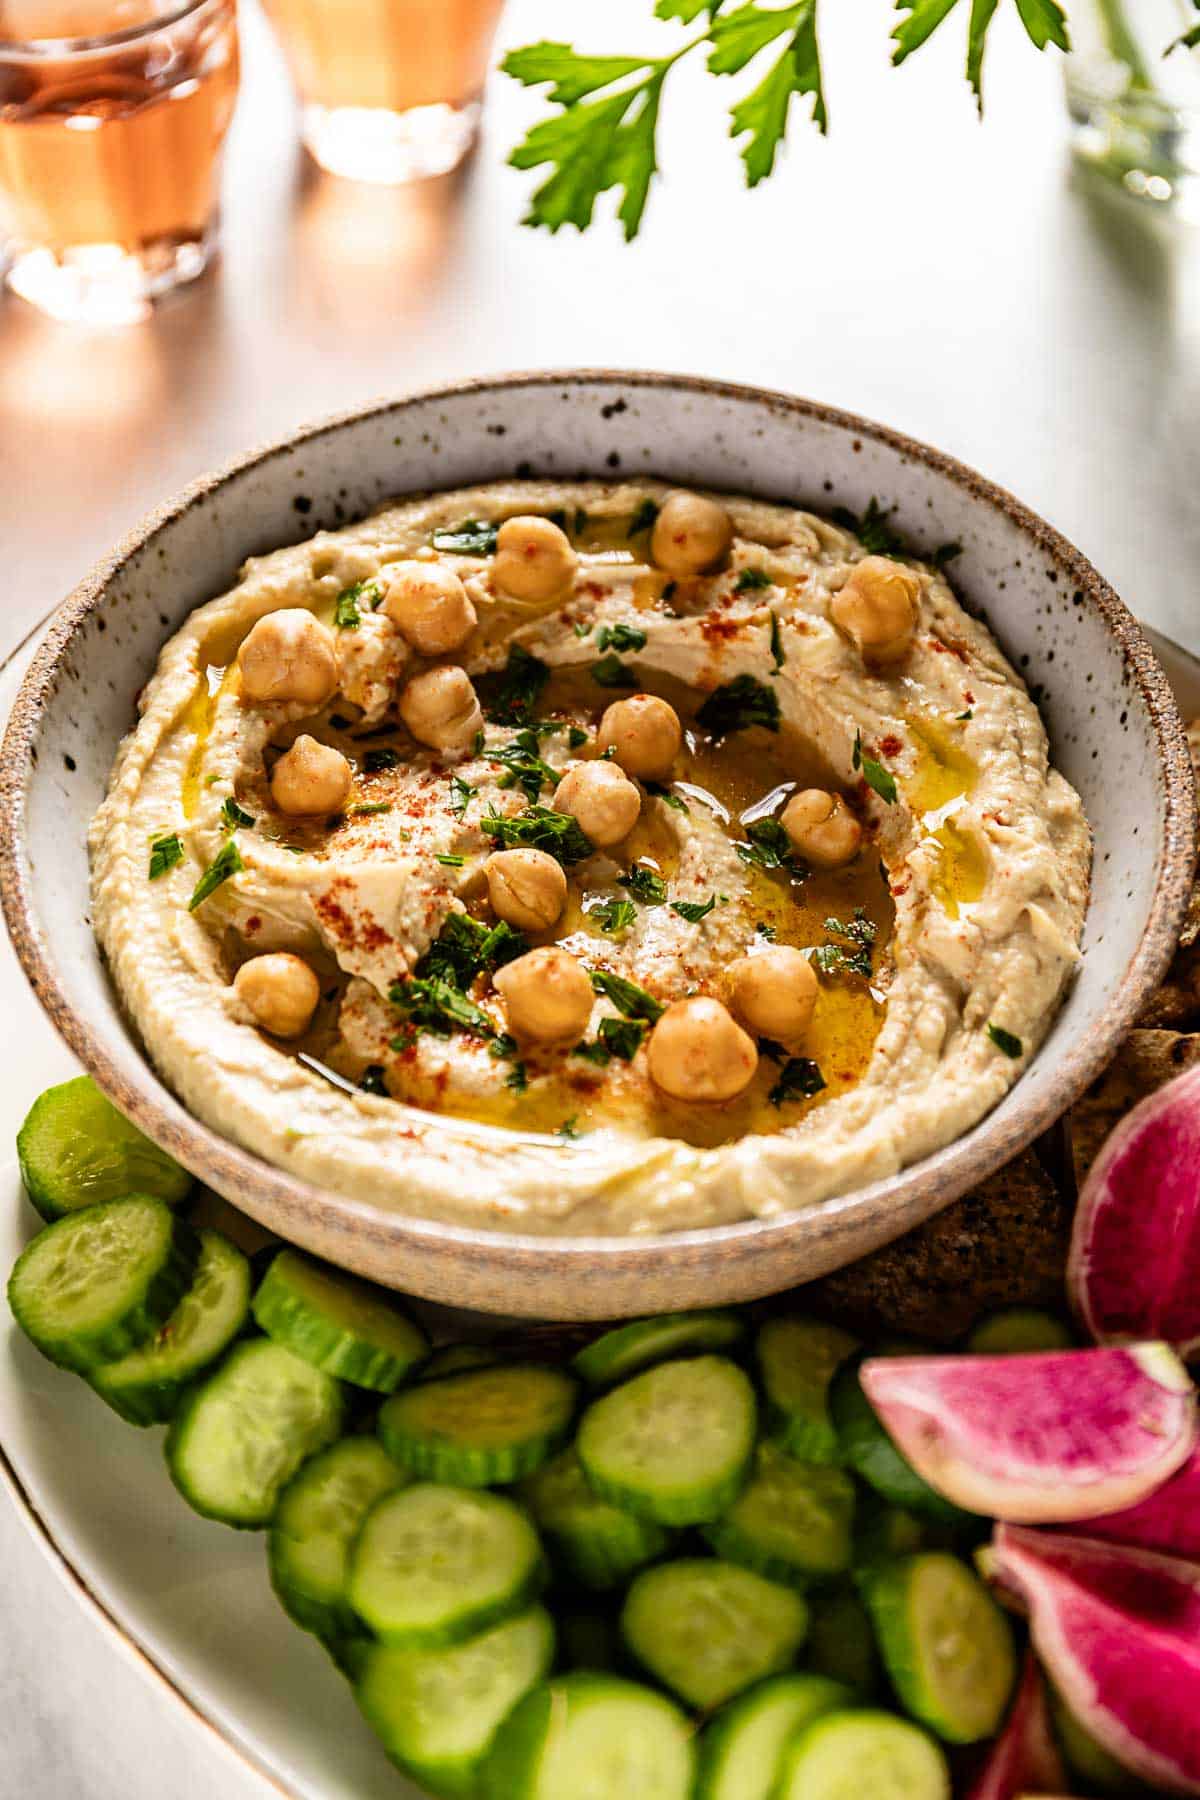 Greek hummus in a bowl garnished with chickpeas and parsley.